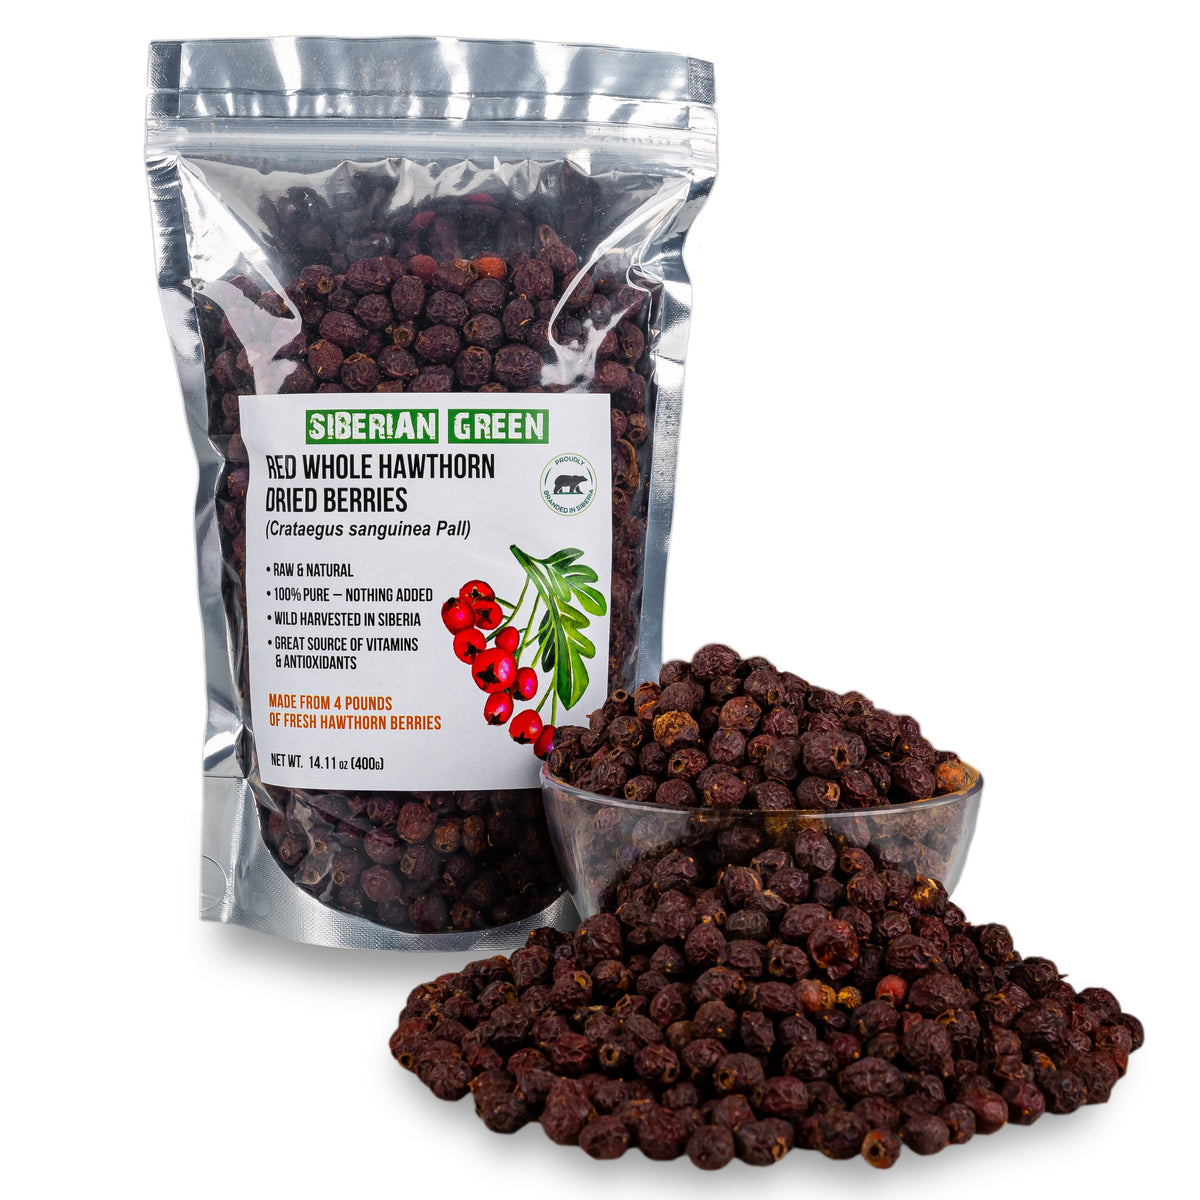 Whole Red Hawthorn Dried Berries 400g Wild Harvested Crataegus Sanguinea from Altai